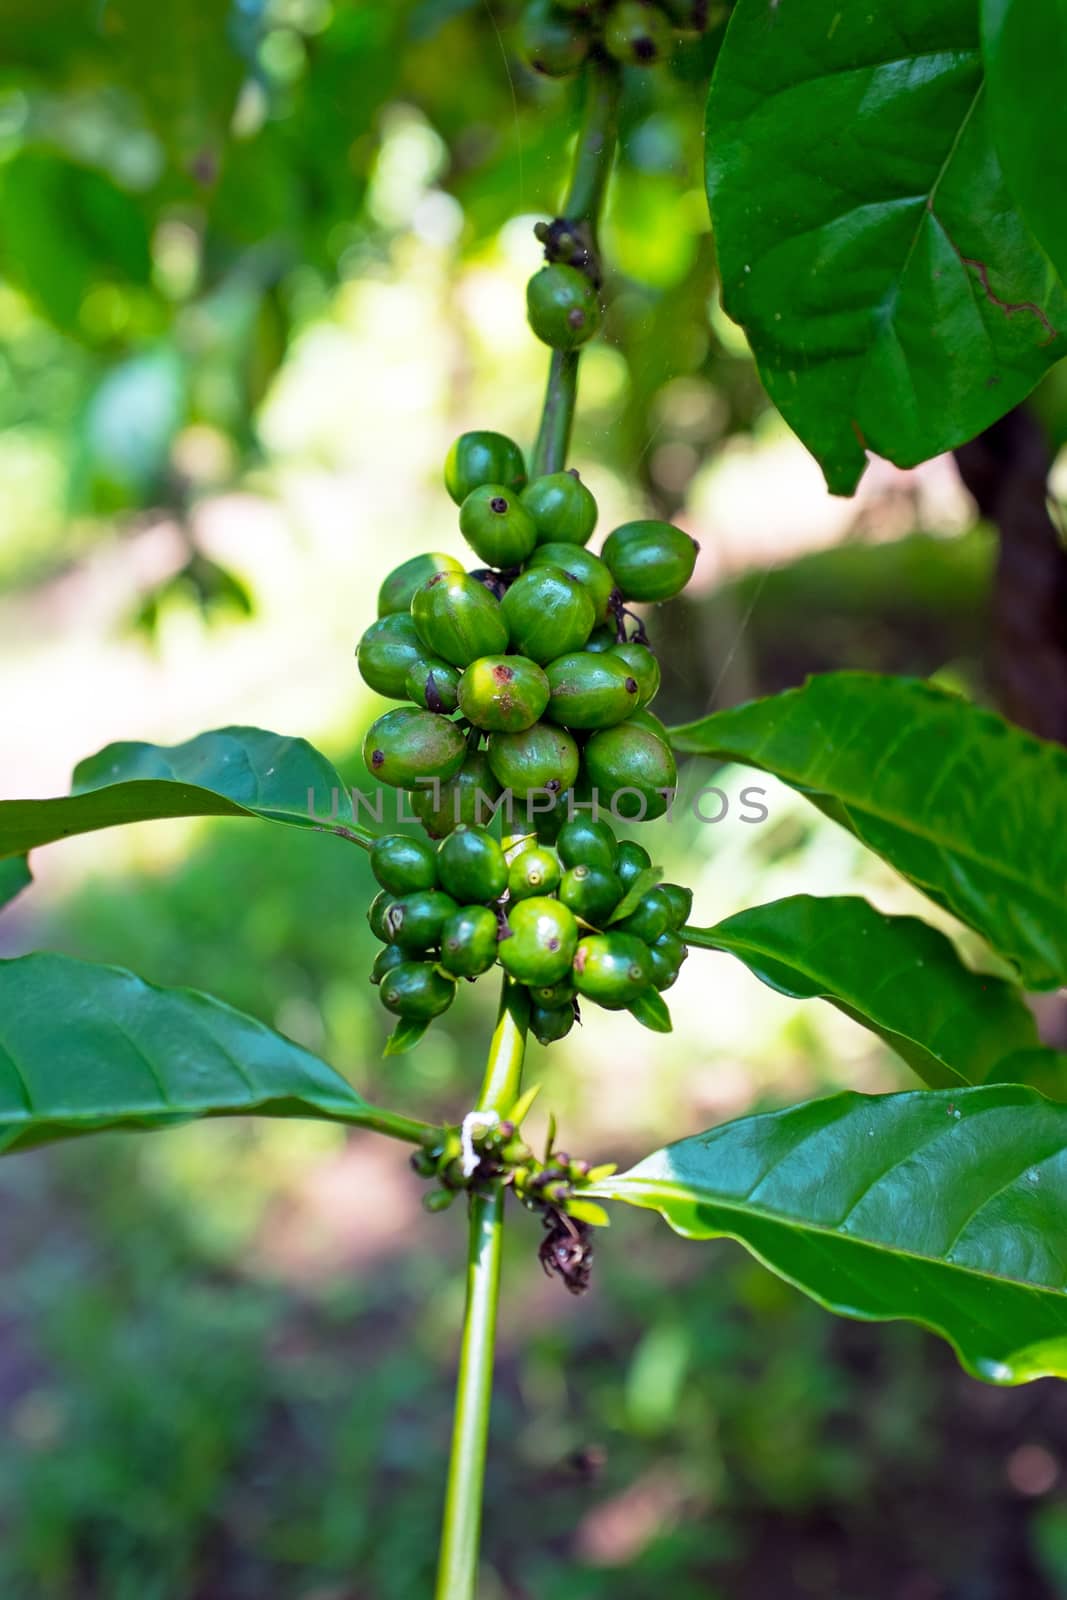 Green Coffee Beans on the Branch in Bali Indonesia by devy